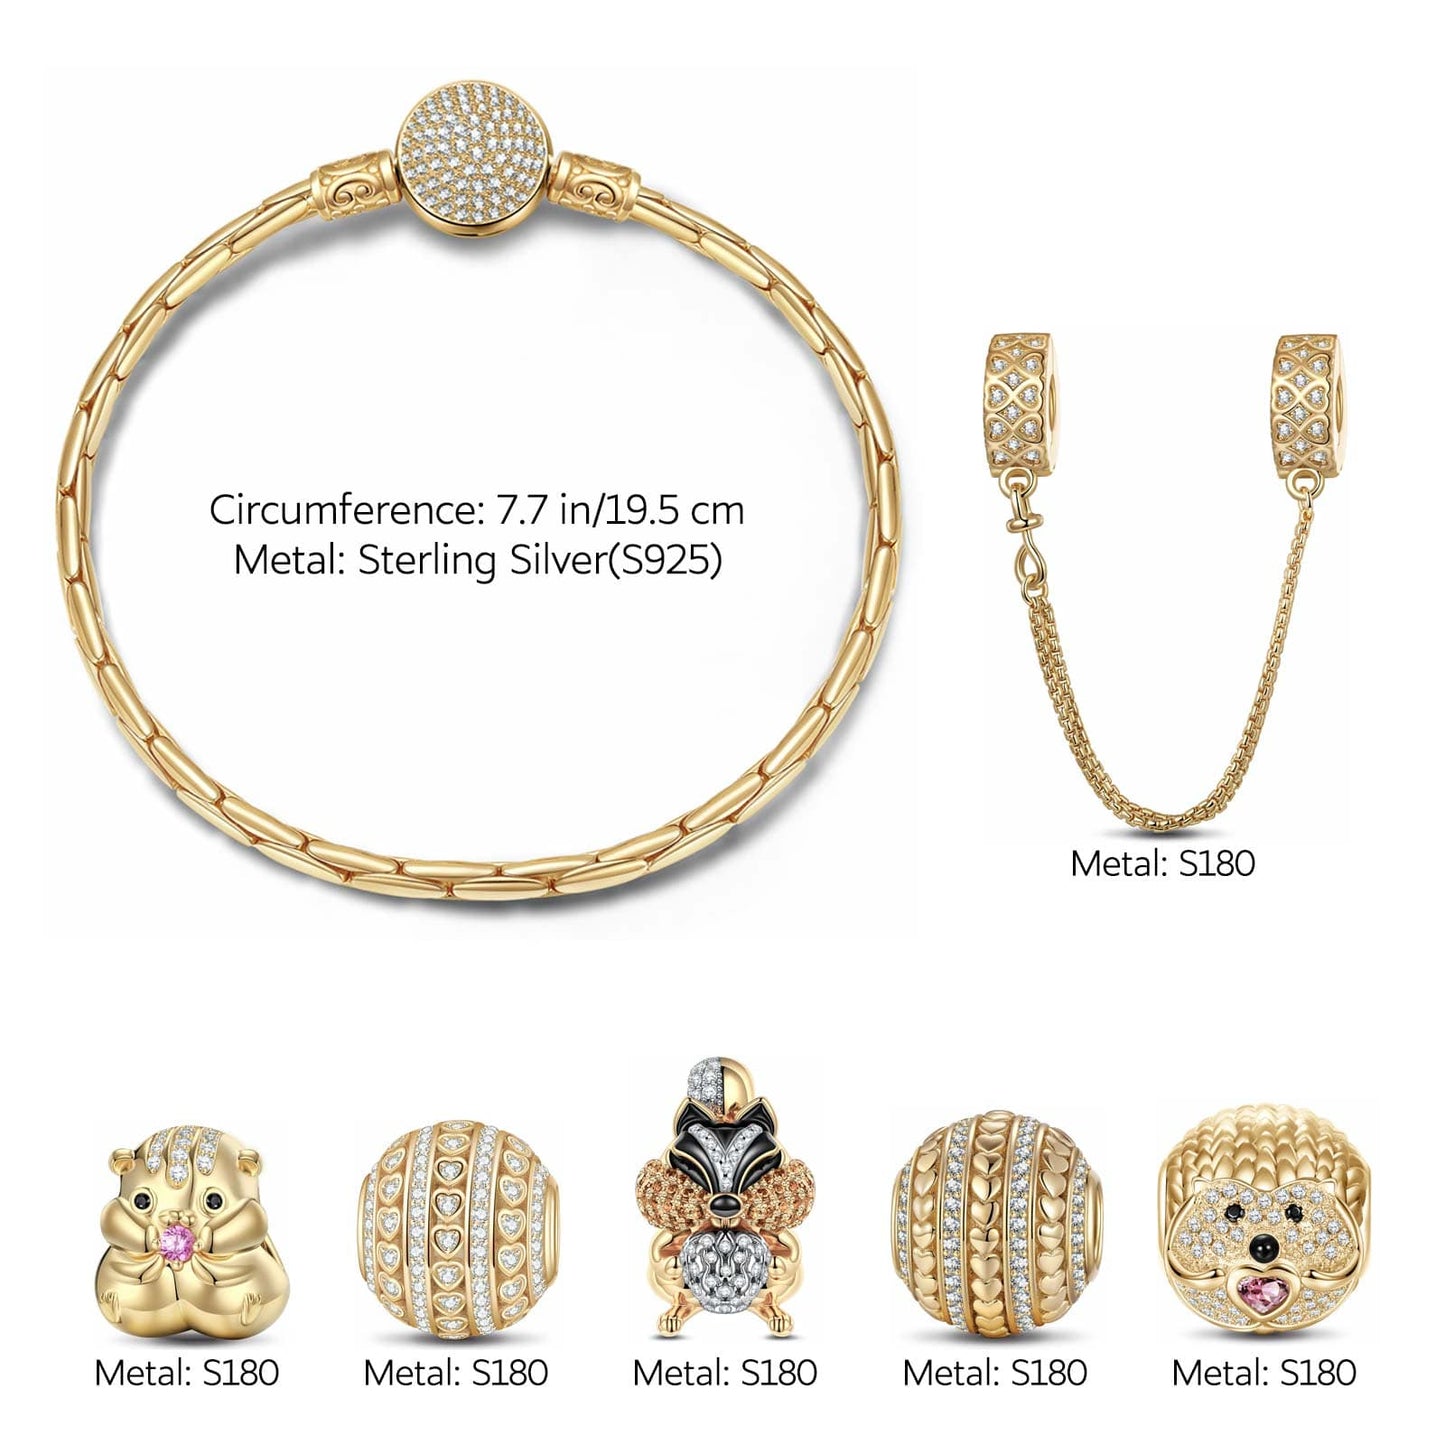 Sterling Silver Adorable Critter Animals Charms Bracelet Set With Enamel In 14K Gold Plated